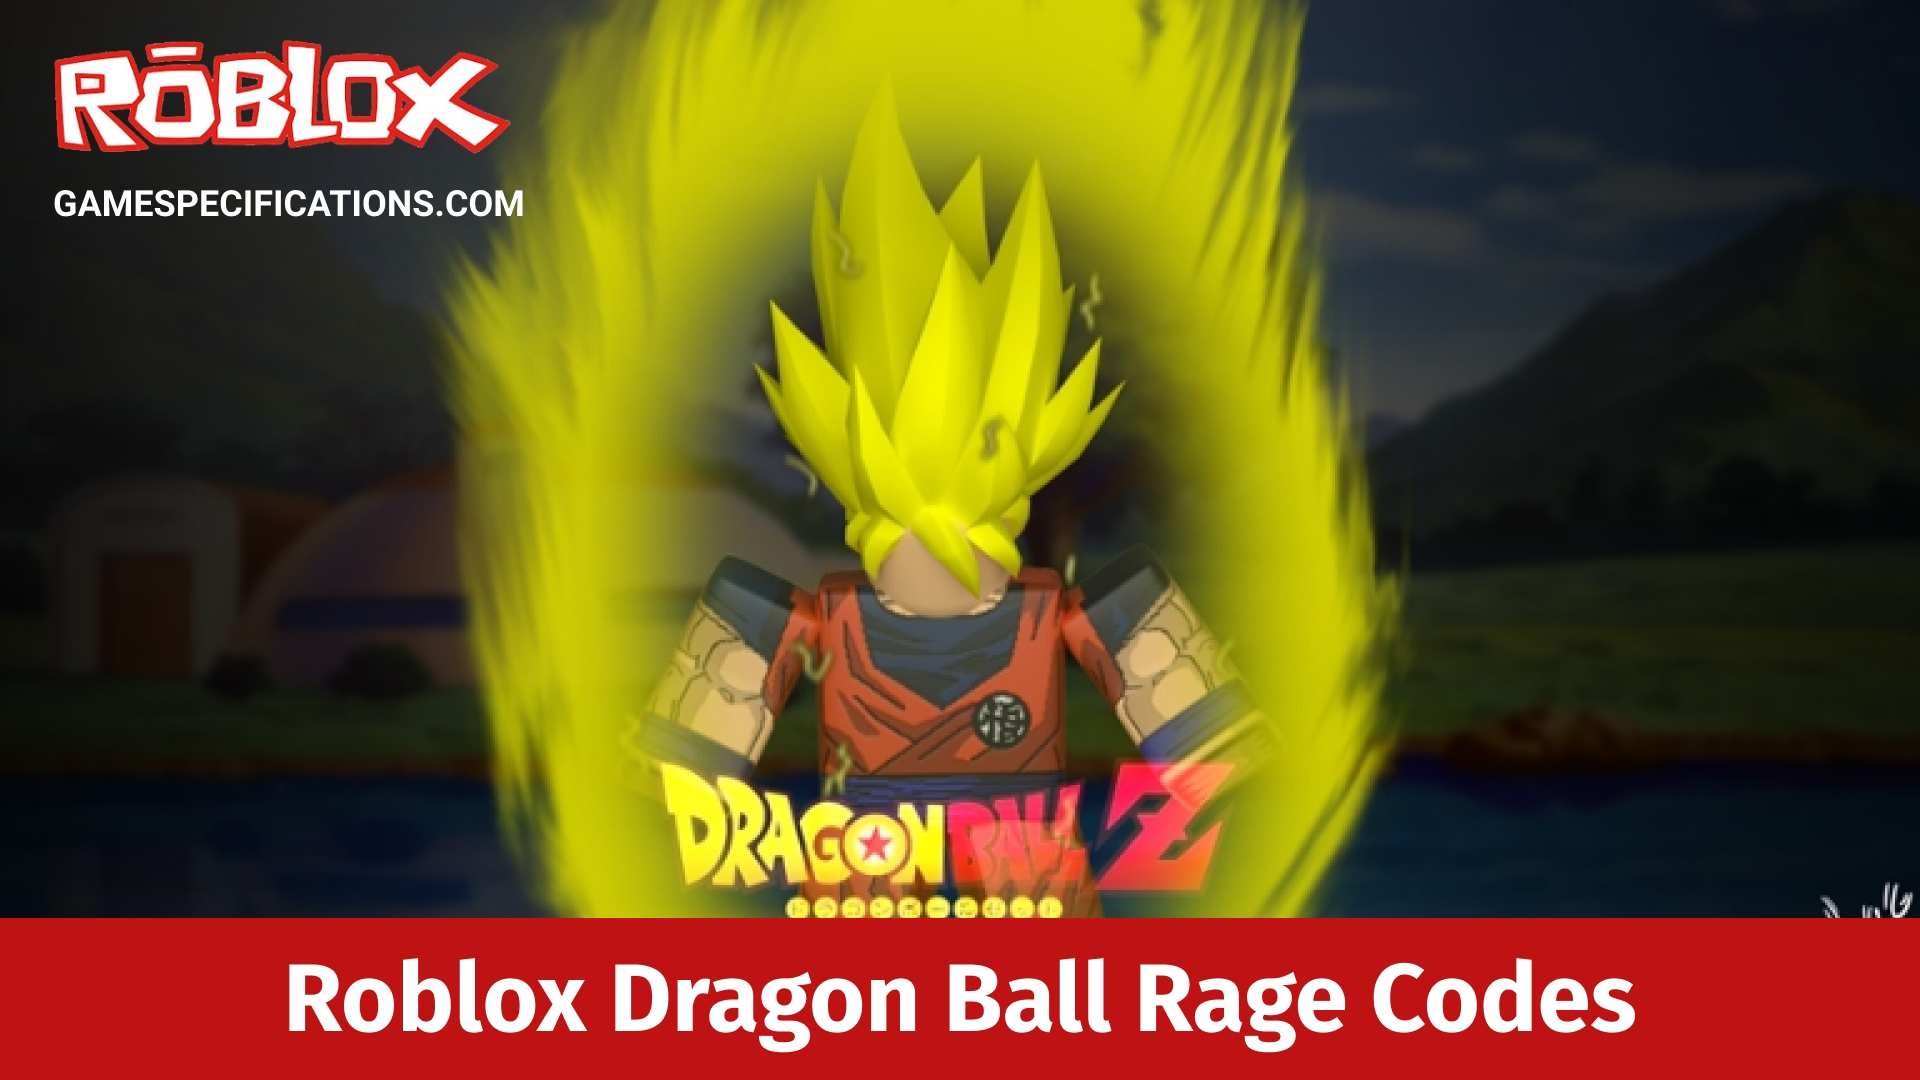 Roblox Dragon Ball Rage Codes July 2021 Game Specifications - dragon rage cods roblox